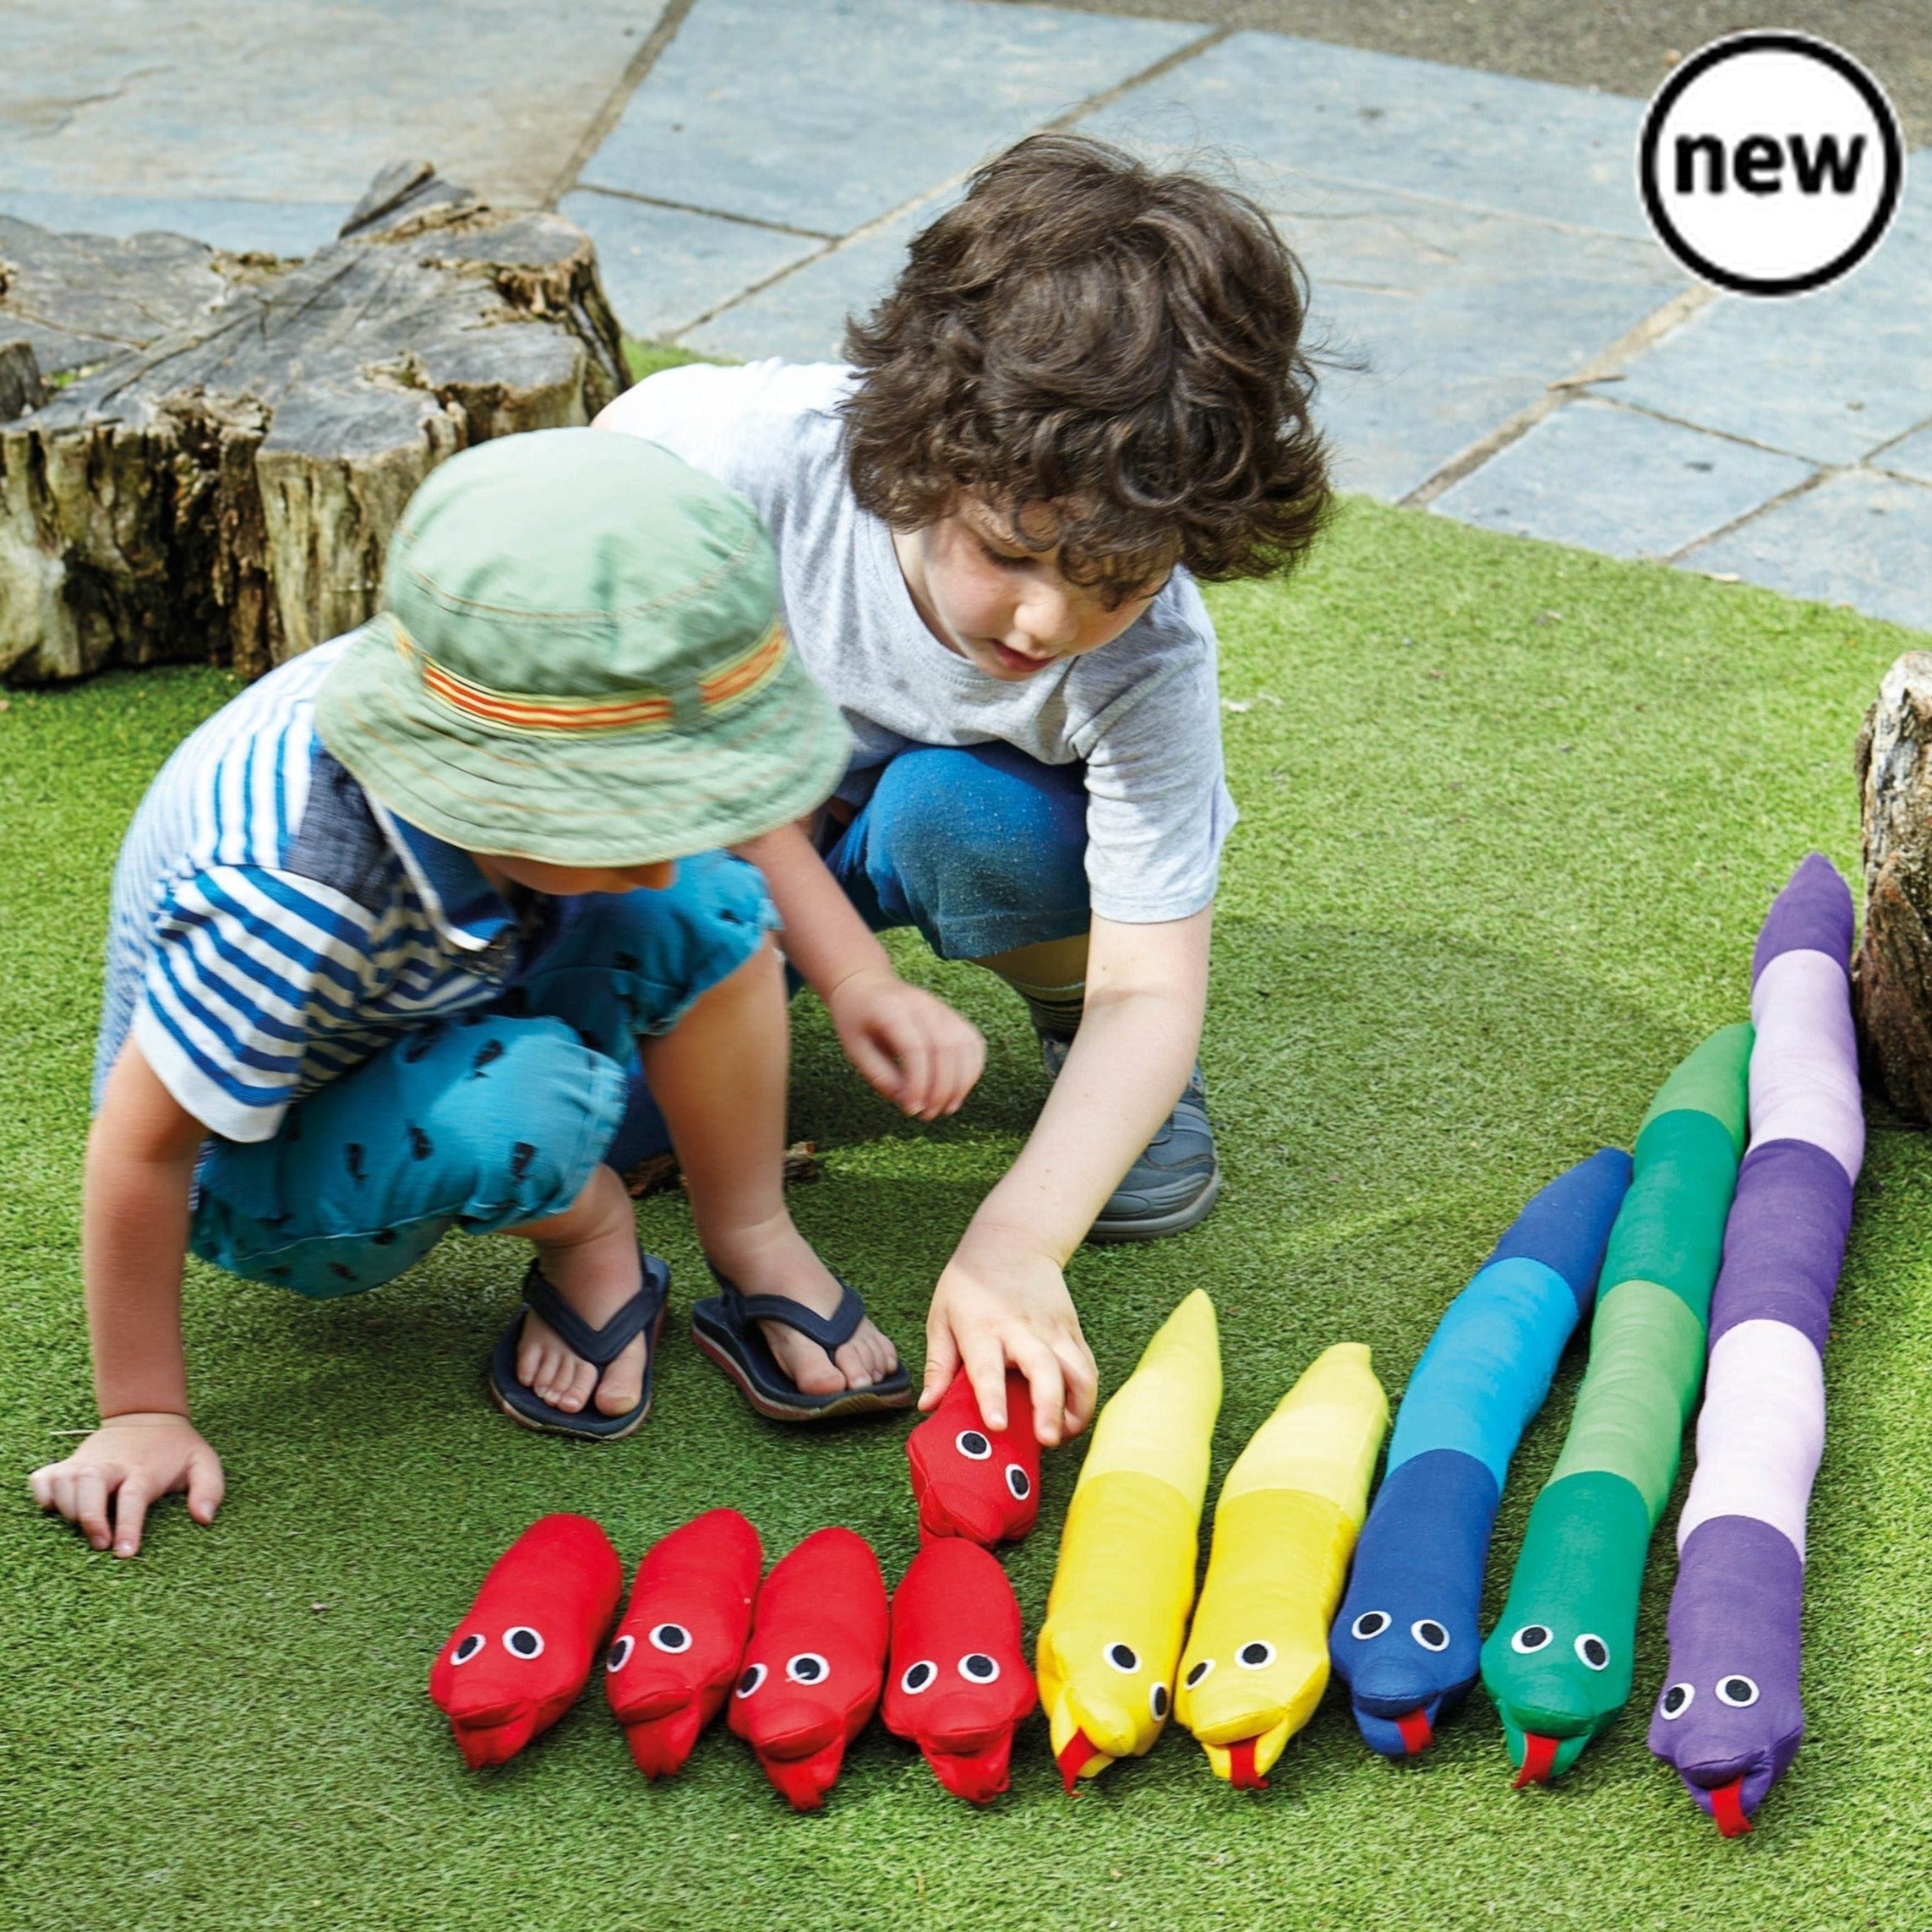 Measuring Snakes, These tactile, colourful snakes are the perfect way to introduce young children to the key ideas of measurement in a practical and active way. Children will enjoy using the snakes for an endless variety of estimating and measuring activities: comparing the sizes of the snakes, placing them in order from the shortest to the longest, finding objects that are shorter, longer or perhaps the same length as their snake, and of course, for measuring distances! Each set includes ten snakes which a